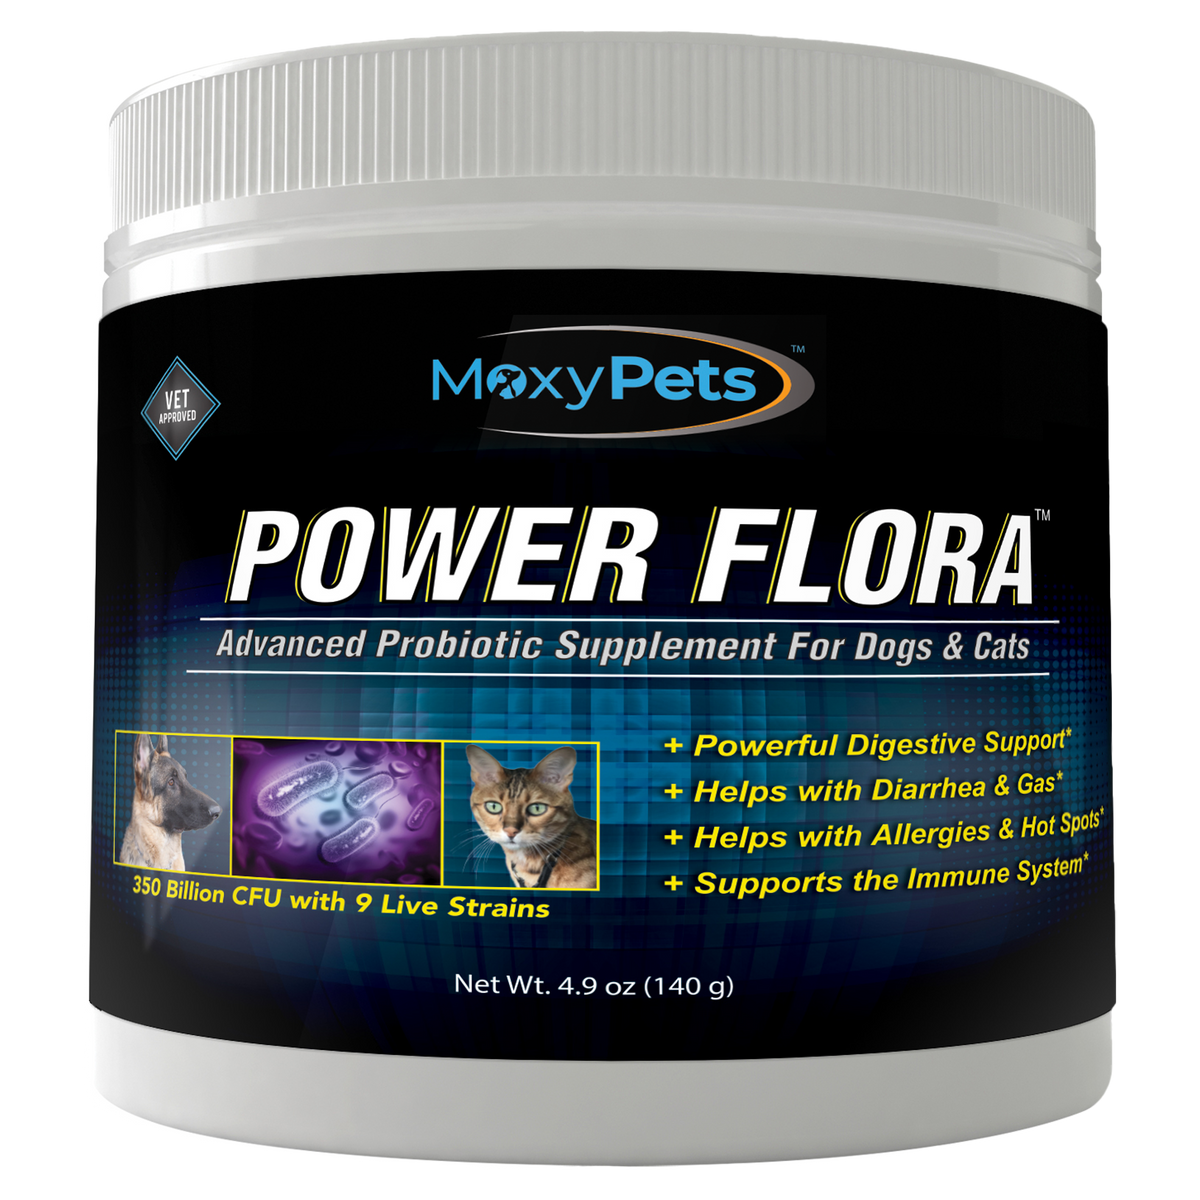 Power Flora - Probiotics for Dogs and Cats with 9 Live Strains